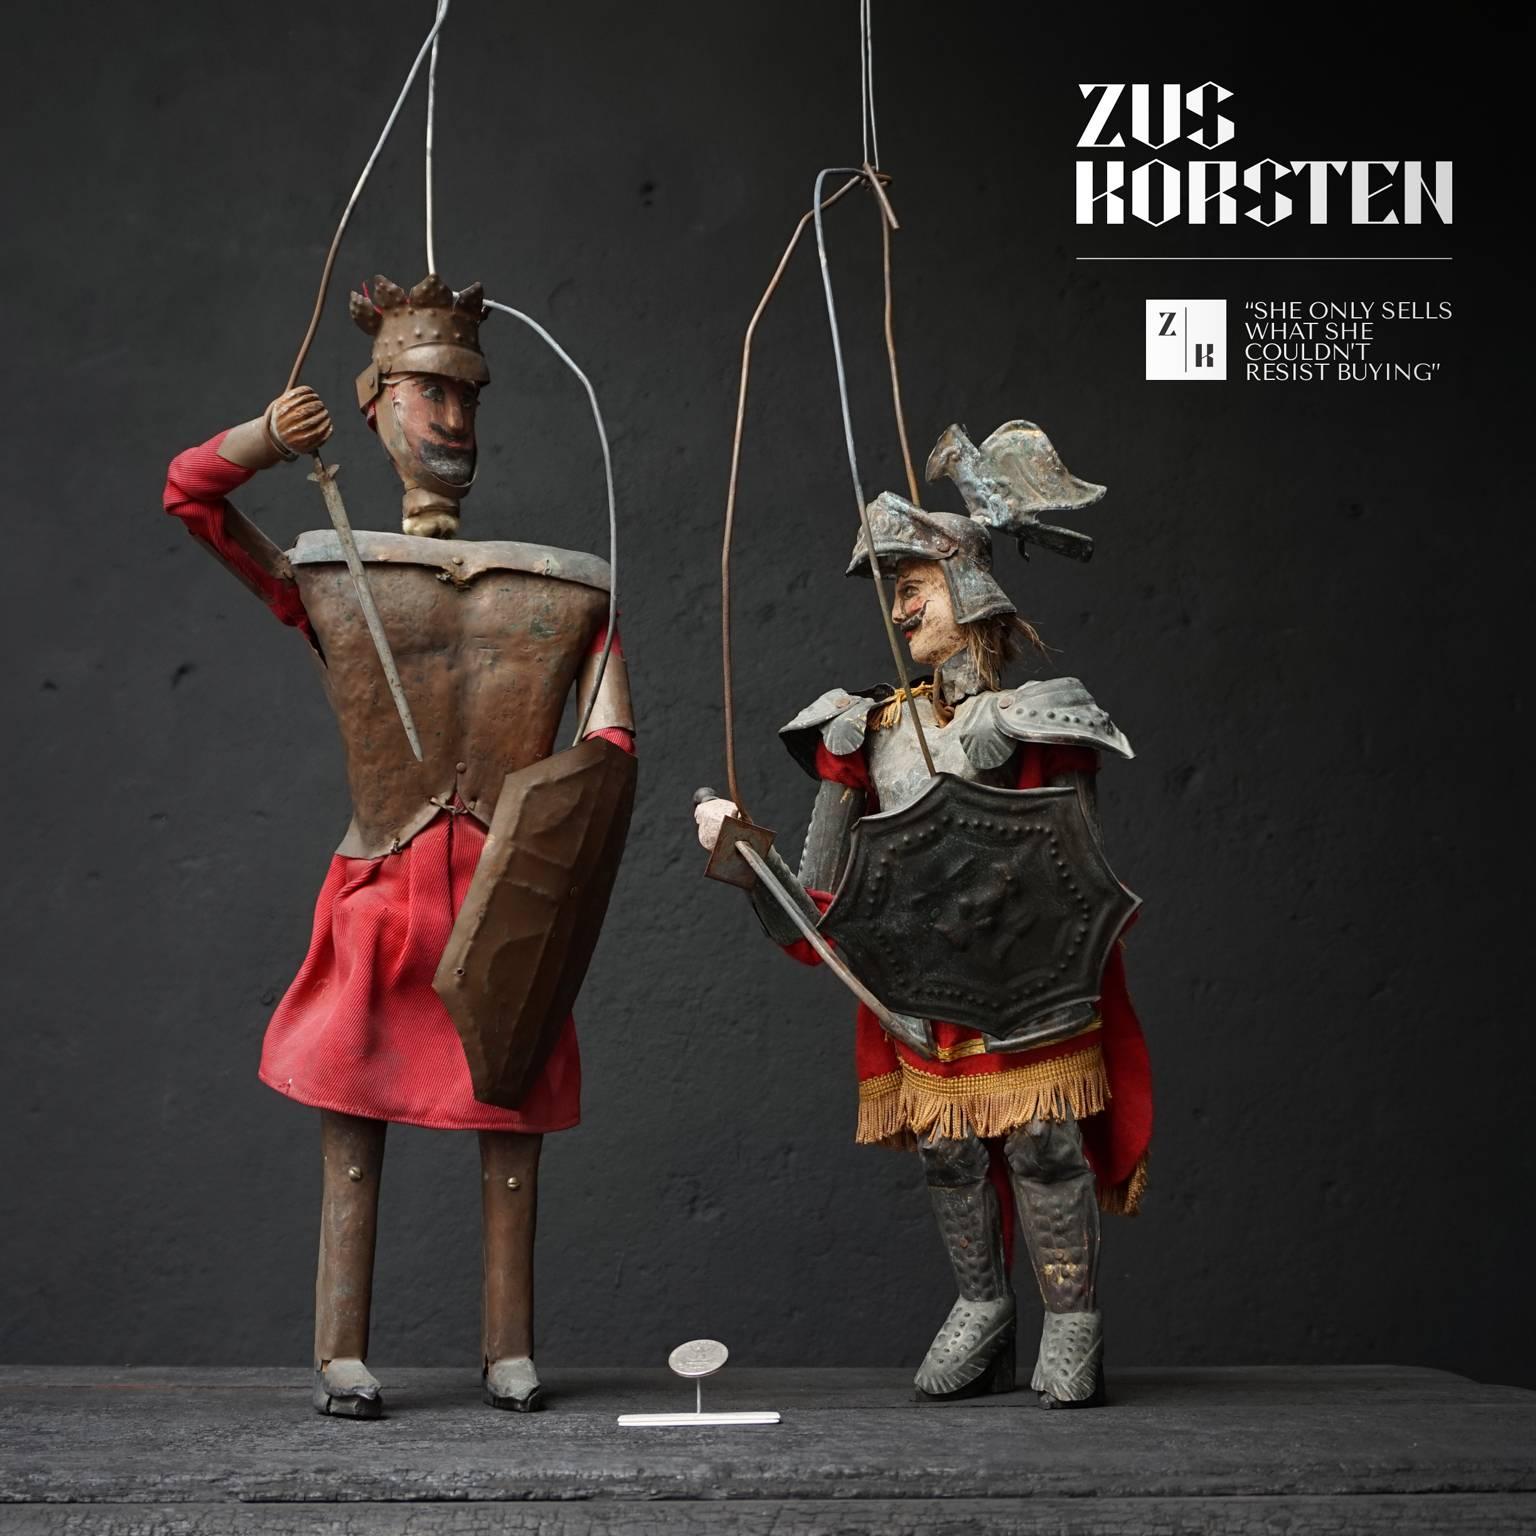 Set of armoured wire string puppets. You will also find these puppets in the famous theatre and museum: "Il Museo internazionale delle marionette" at Sicillie, Palermo, some of them even almost life sized. I recommend visiting one of the